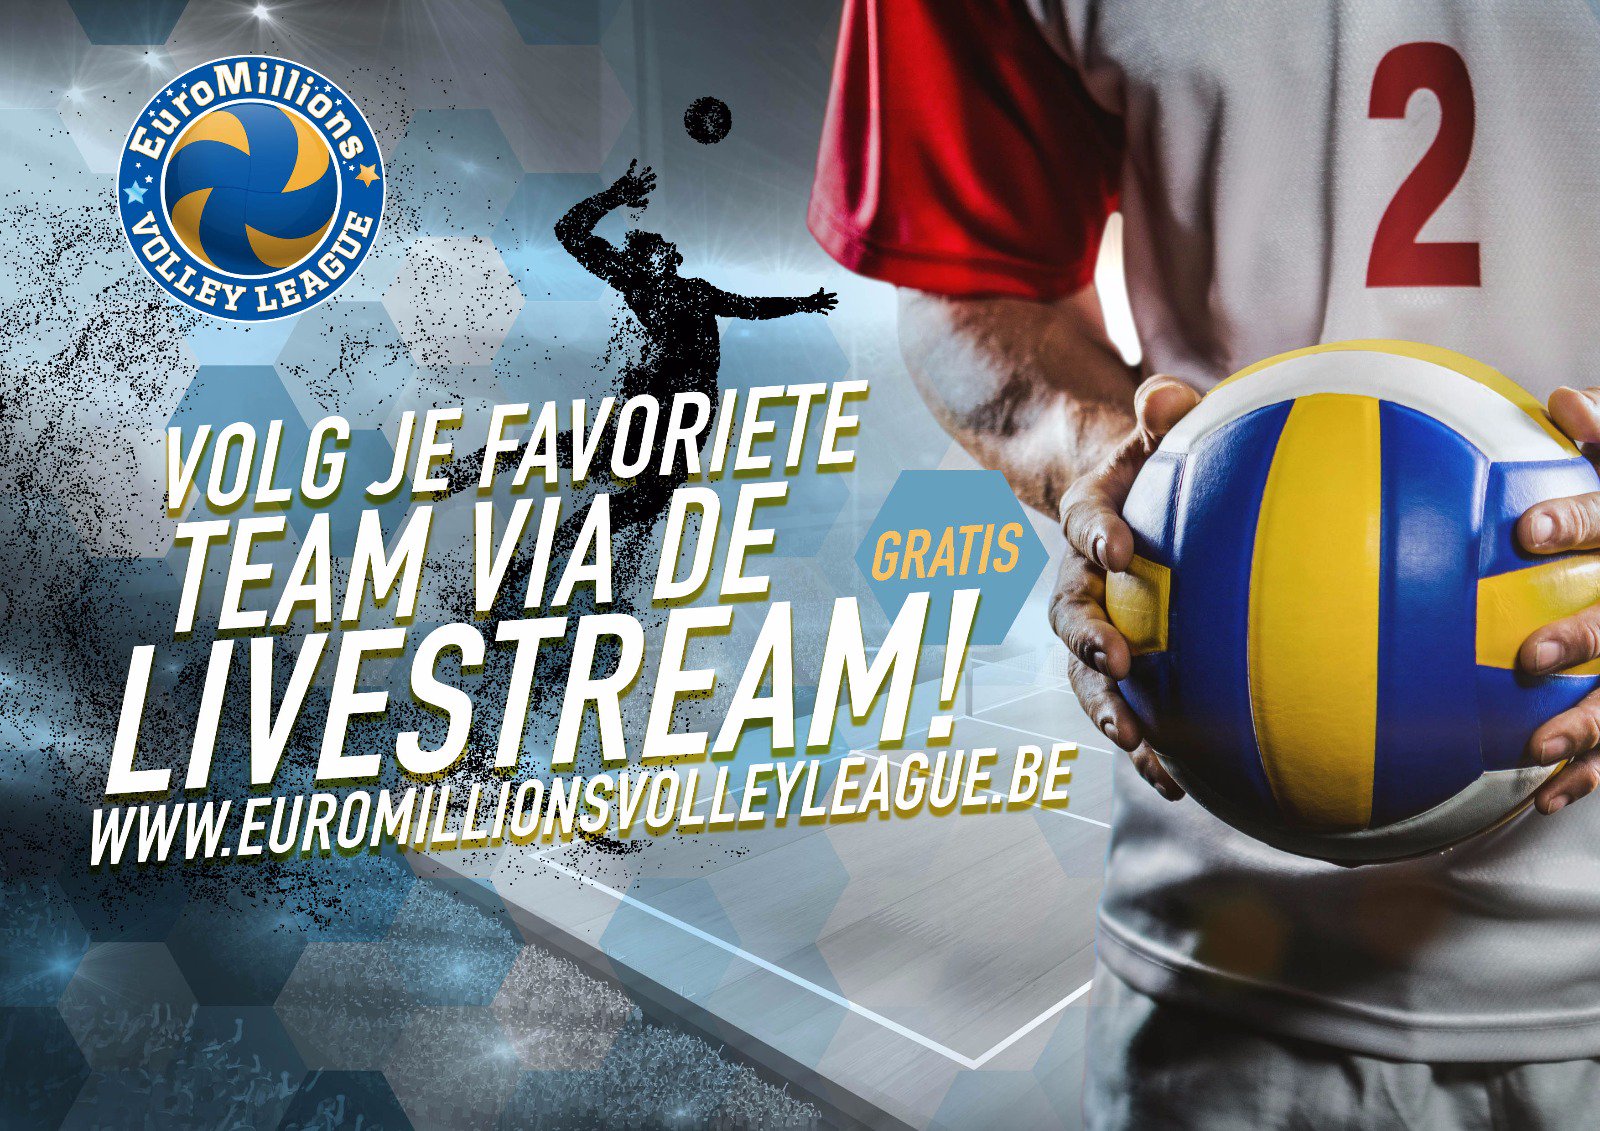 X/ Lotto Volley League در X «This weekend Belgian Volley League live streaming for FREE !! Follow this link https//t.co/EKp9eeEltg #volley #volleyballoppiapro 